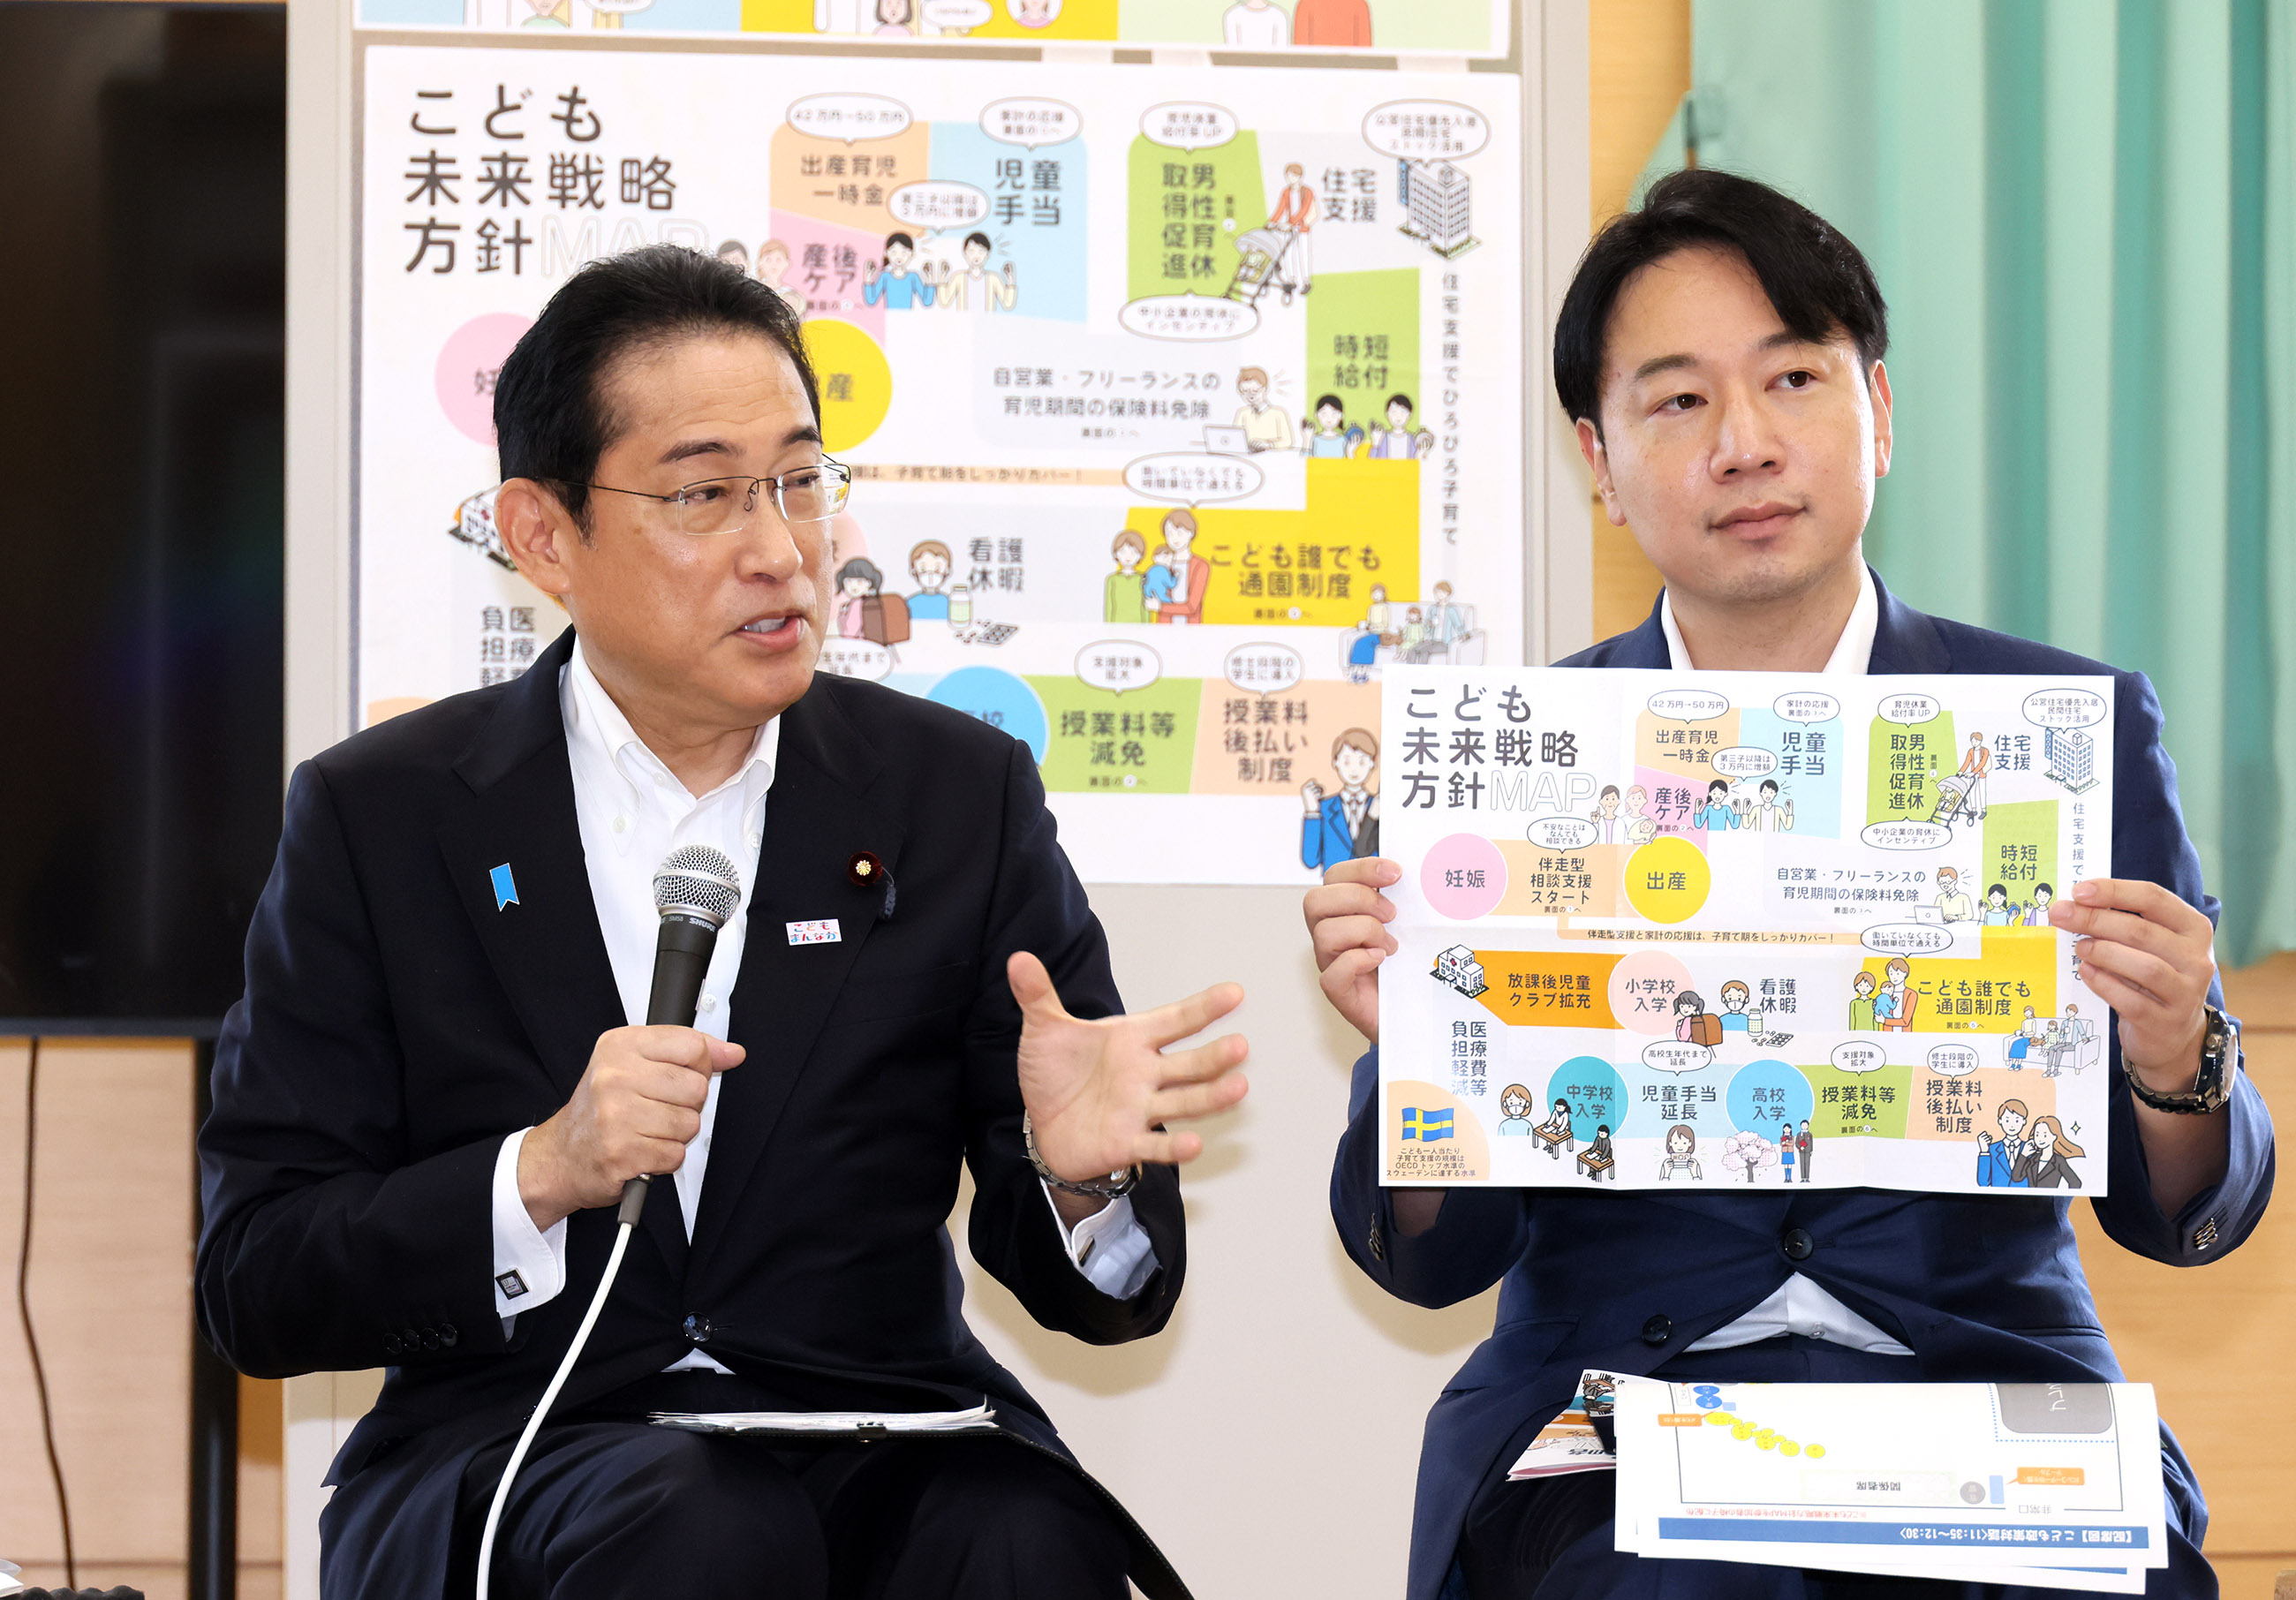 Prime Minister Kishida talking with participants of a public dialogue on policies related to children (2)